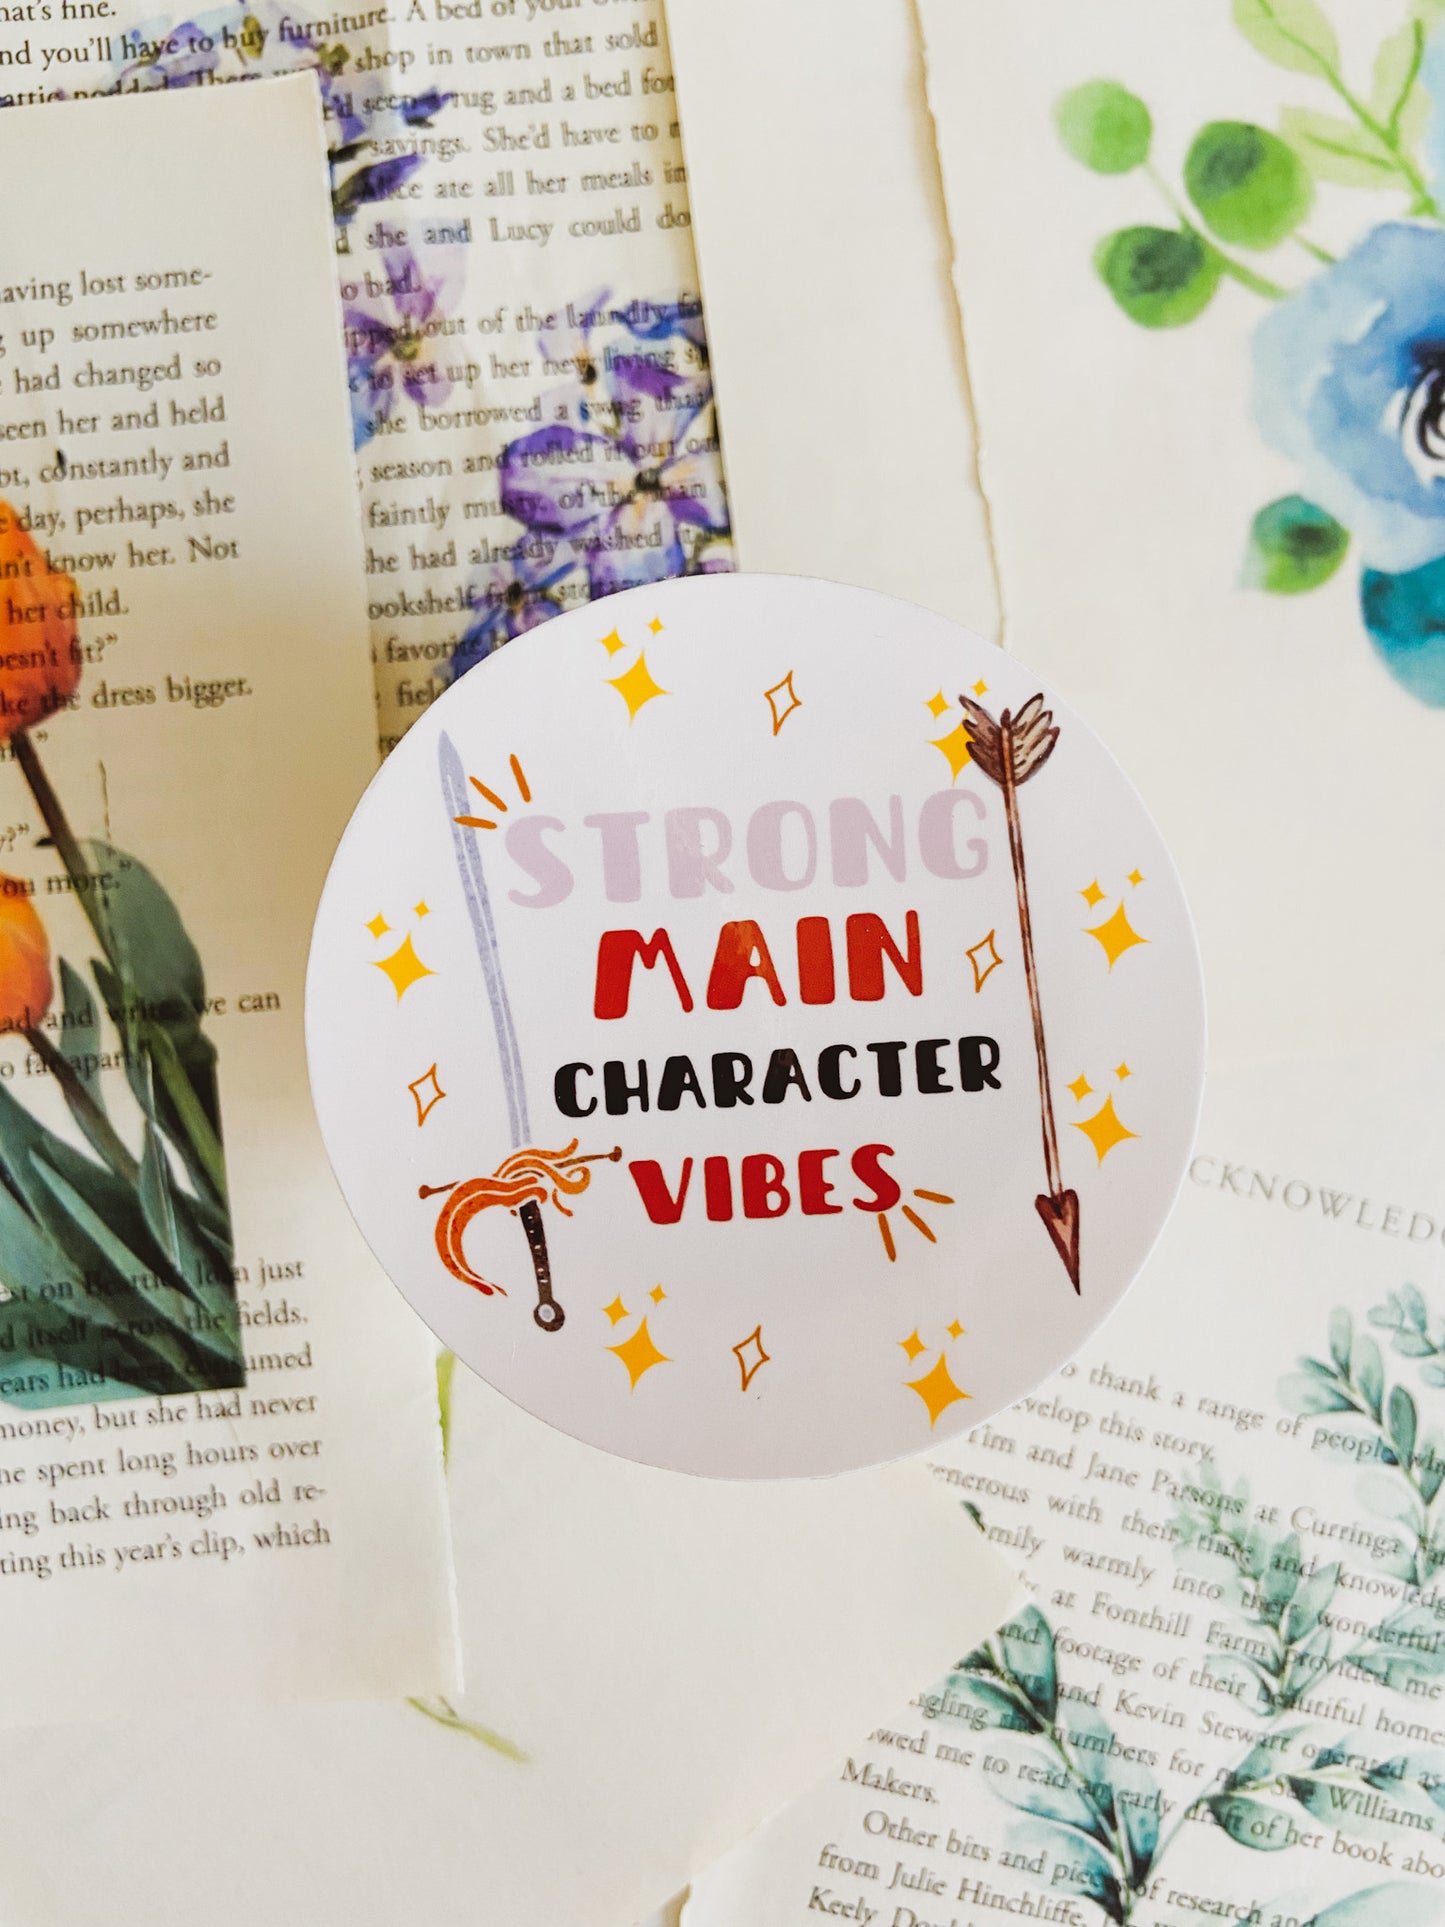 Strong Main Character Vibes Vinyl Sticker